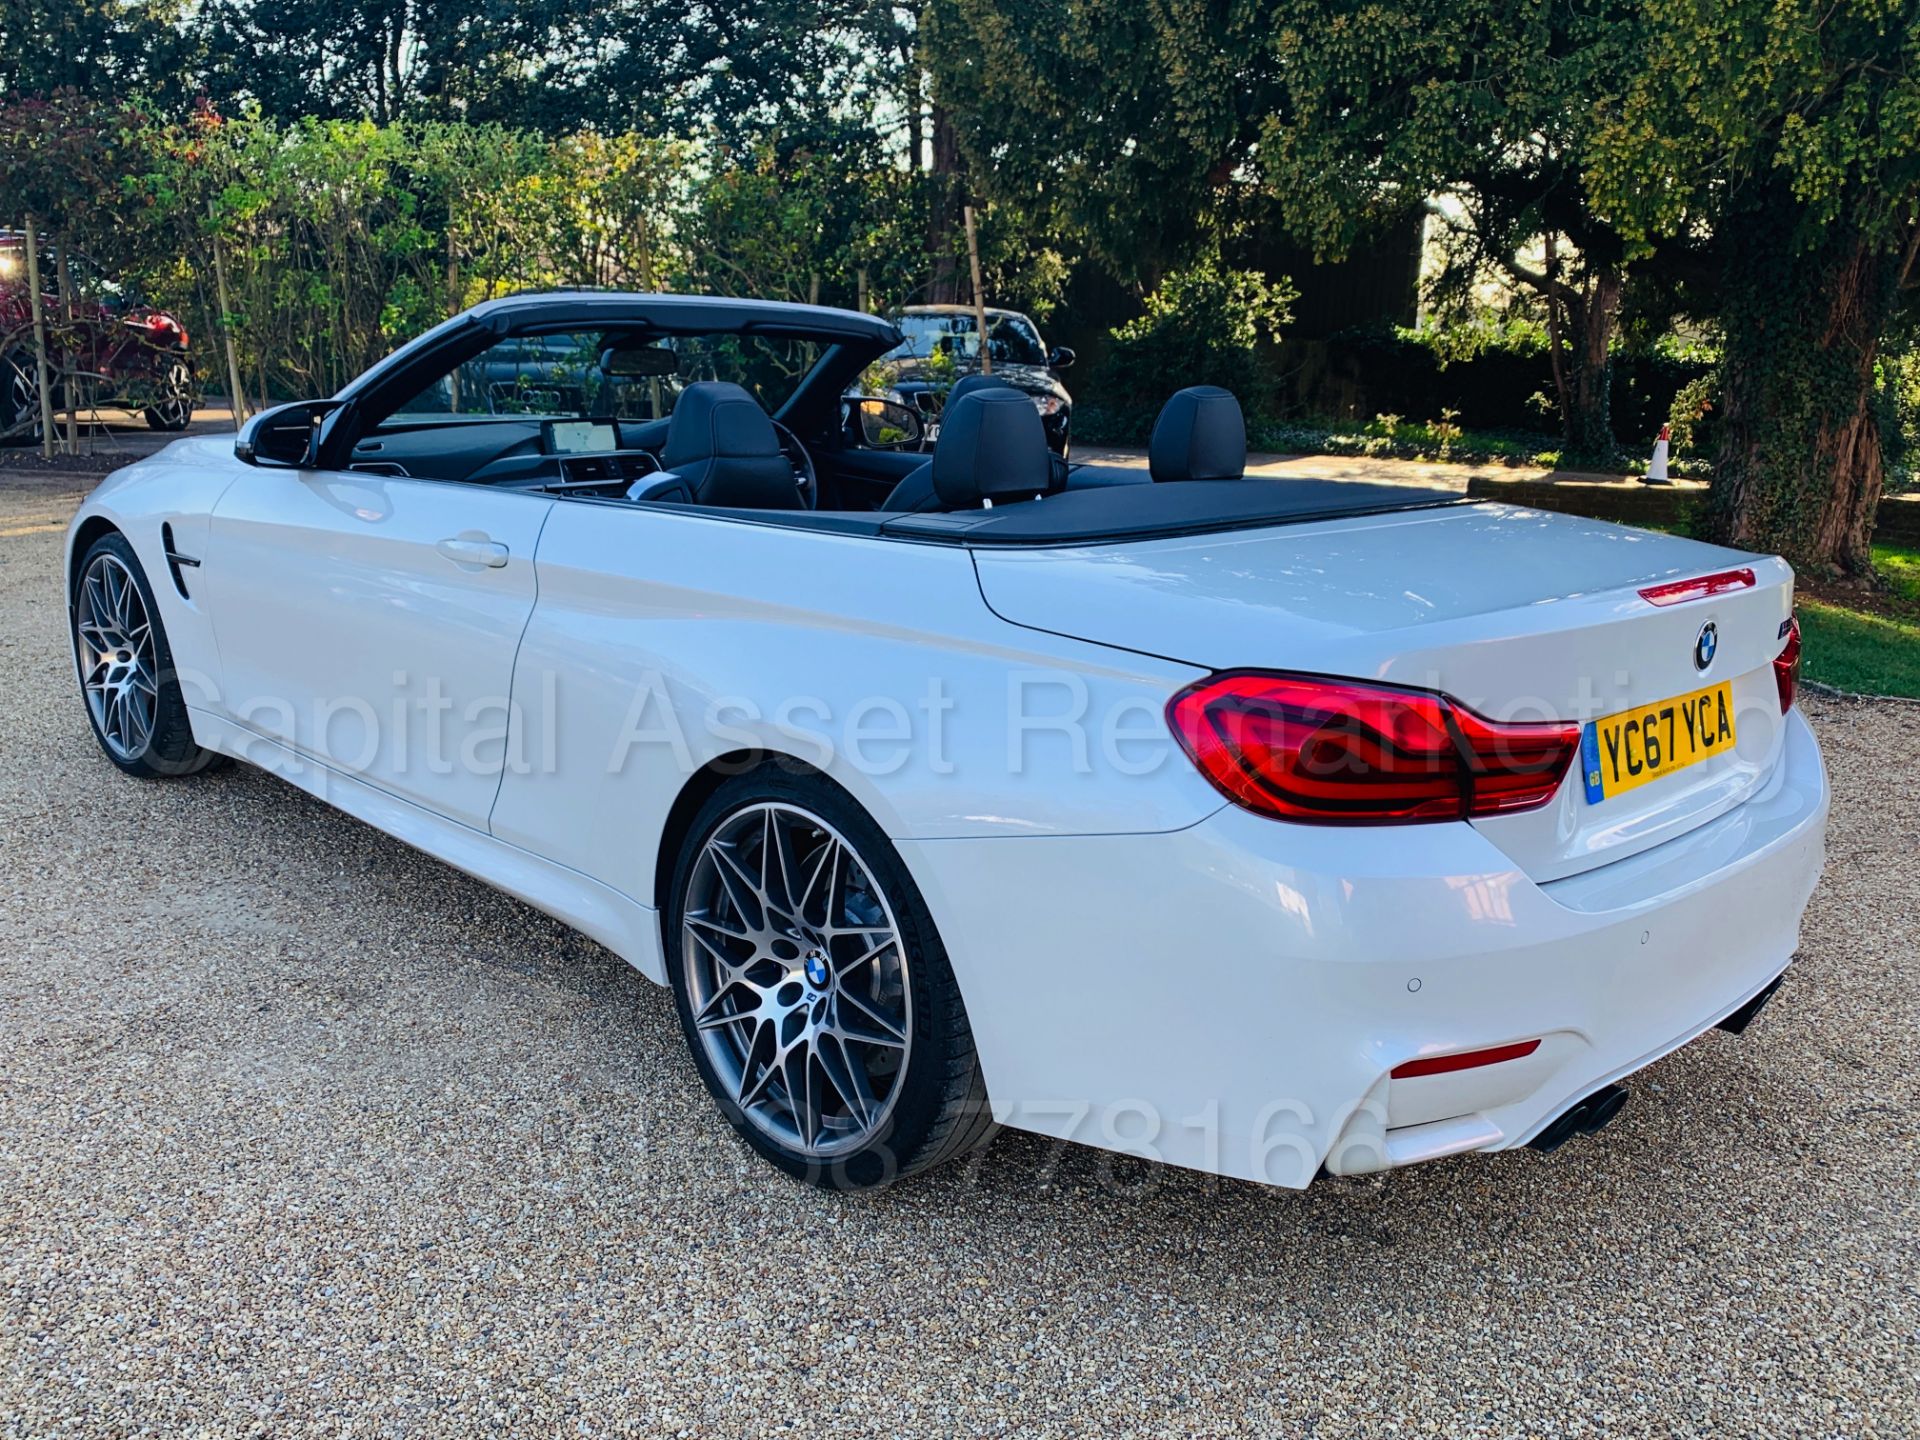 ON SALE BMW M4 CONVERTIBLE *COMPETITION PACKAGE* (2018 MODEL) '431 BHP - M DCT AUTO' WOW!!!!! - Image 7 of 89